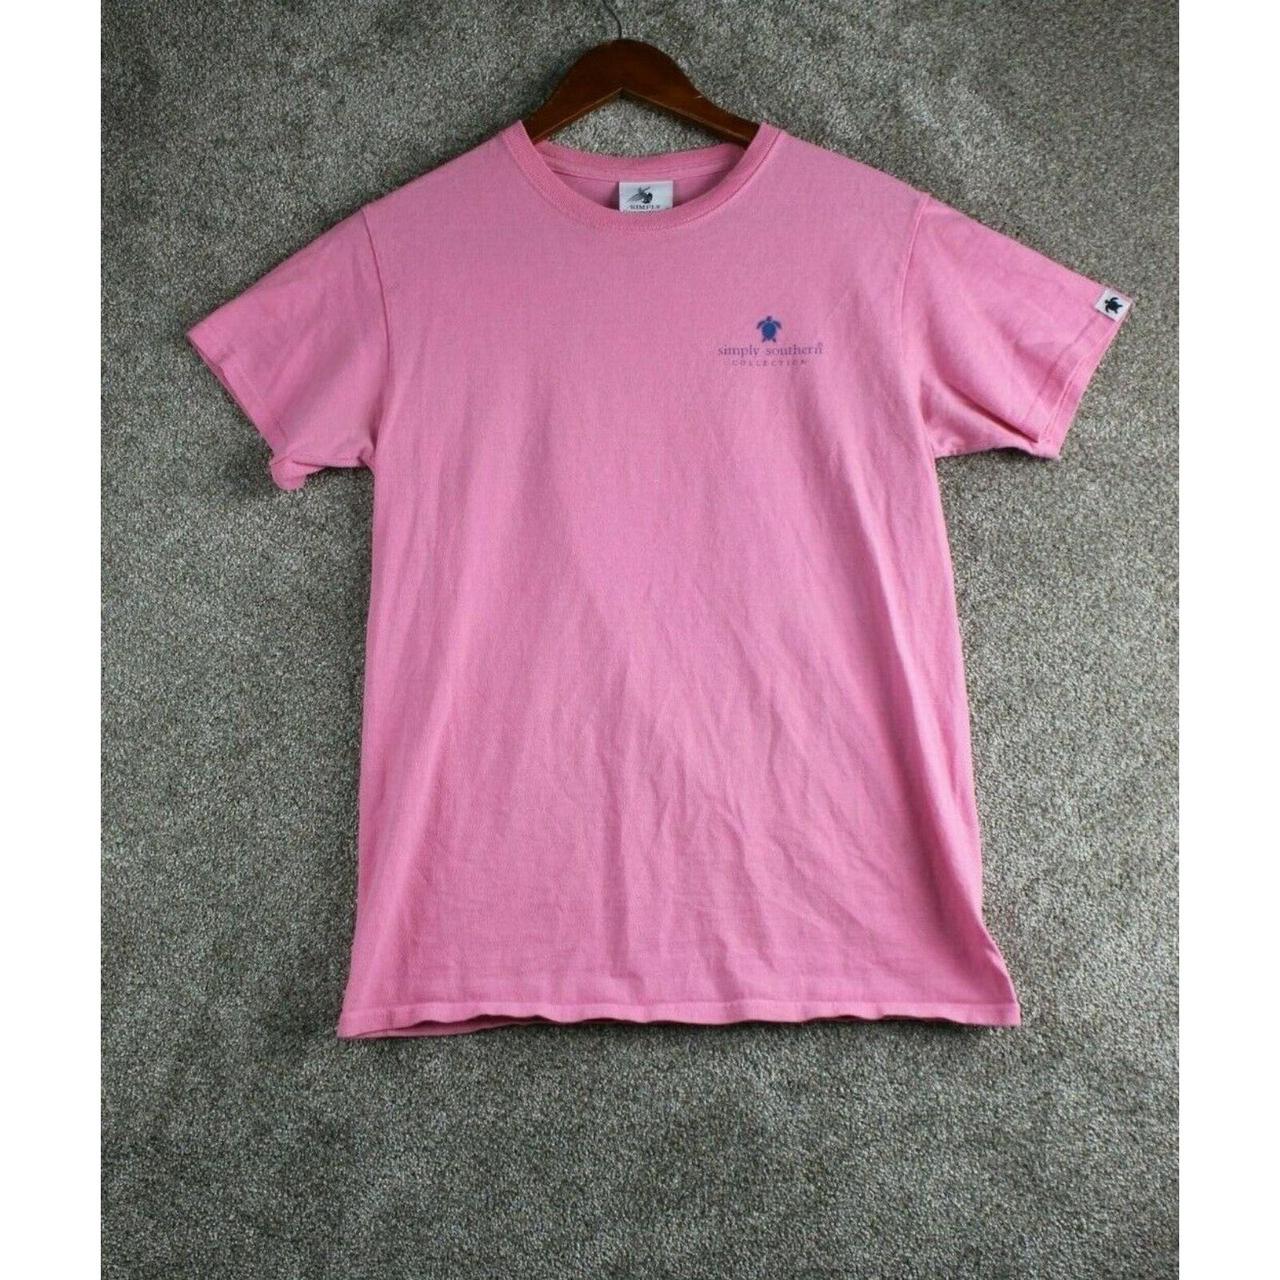 Product Image 1 - Simple Southern Women's Pink t